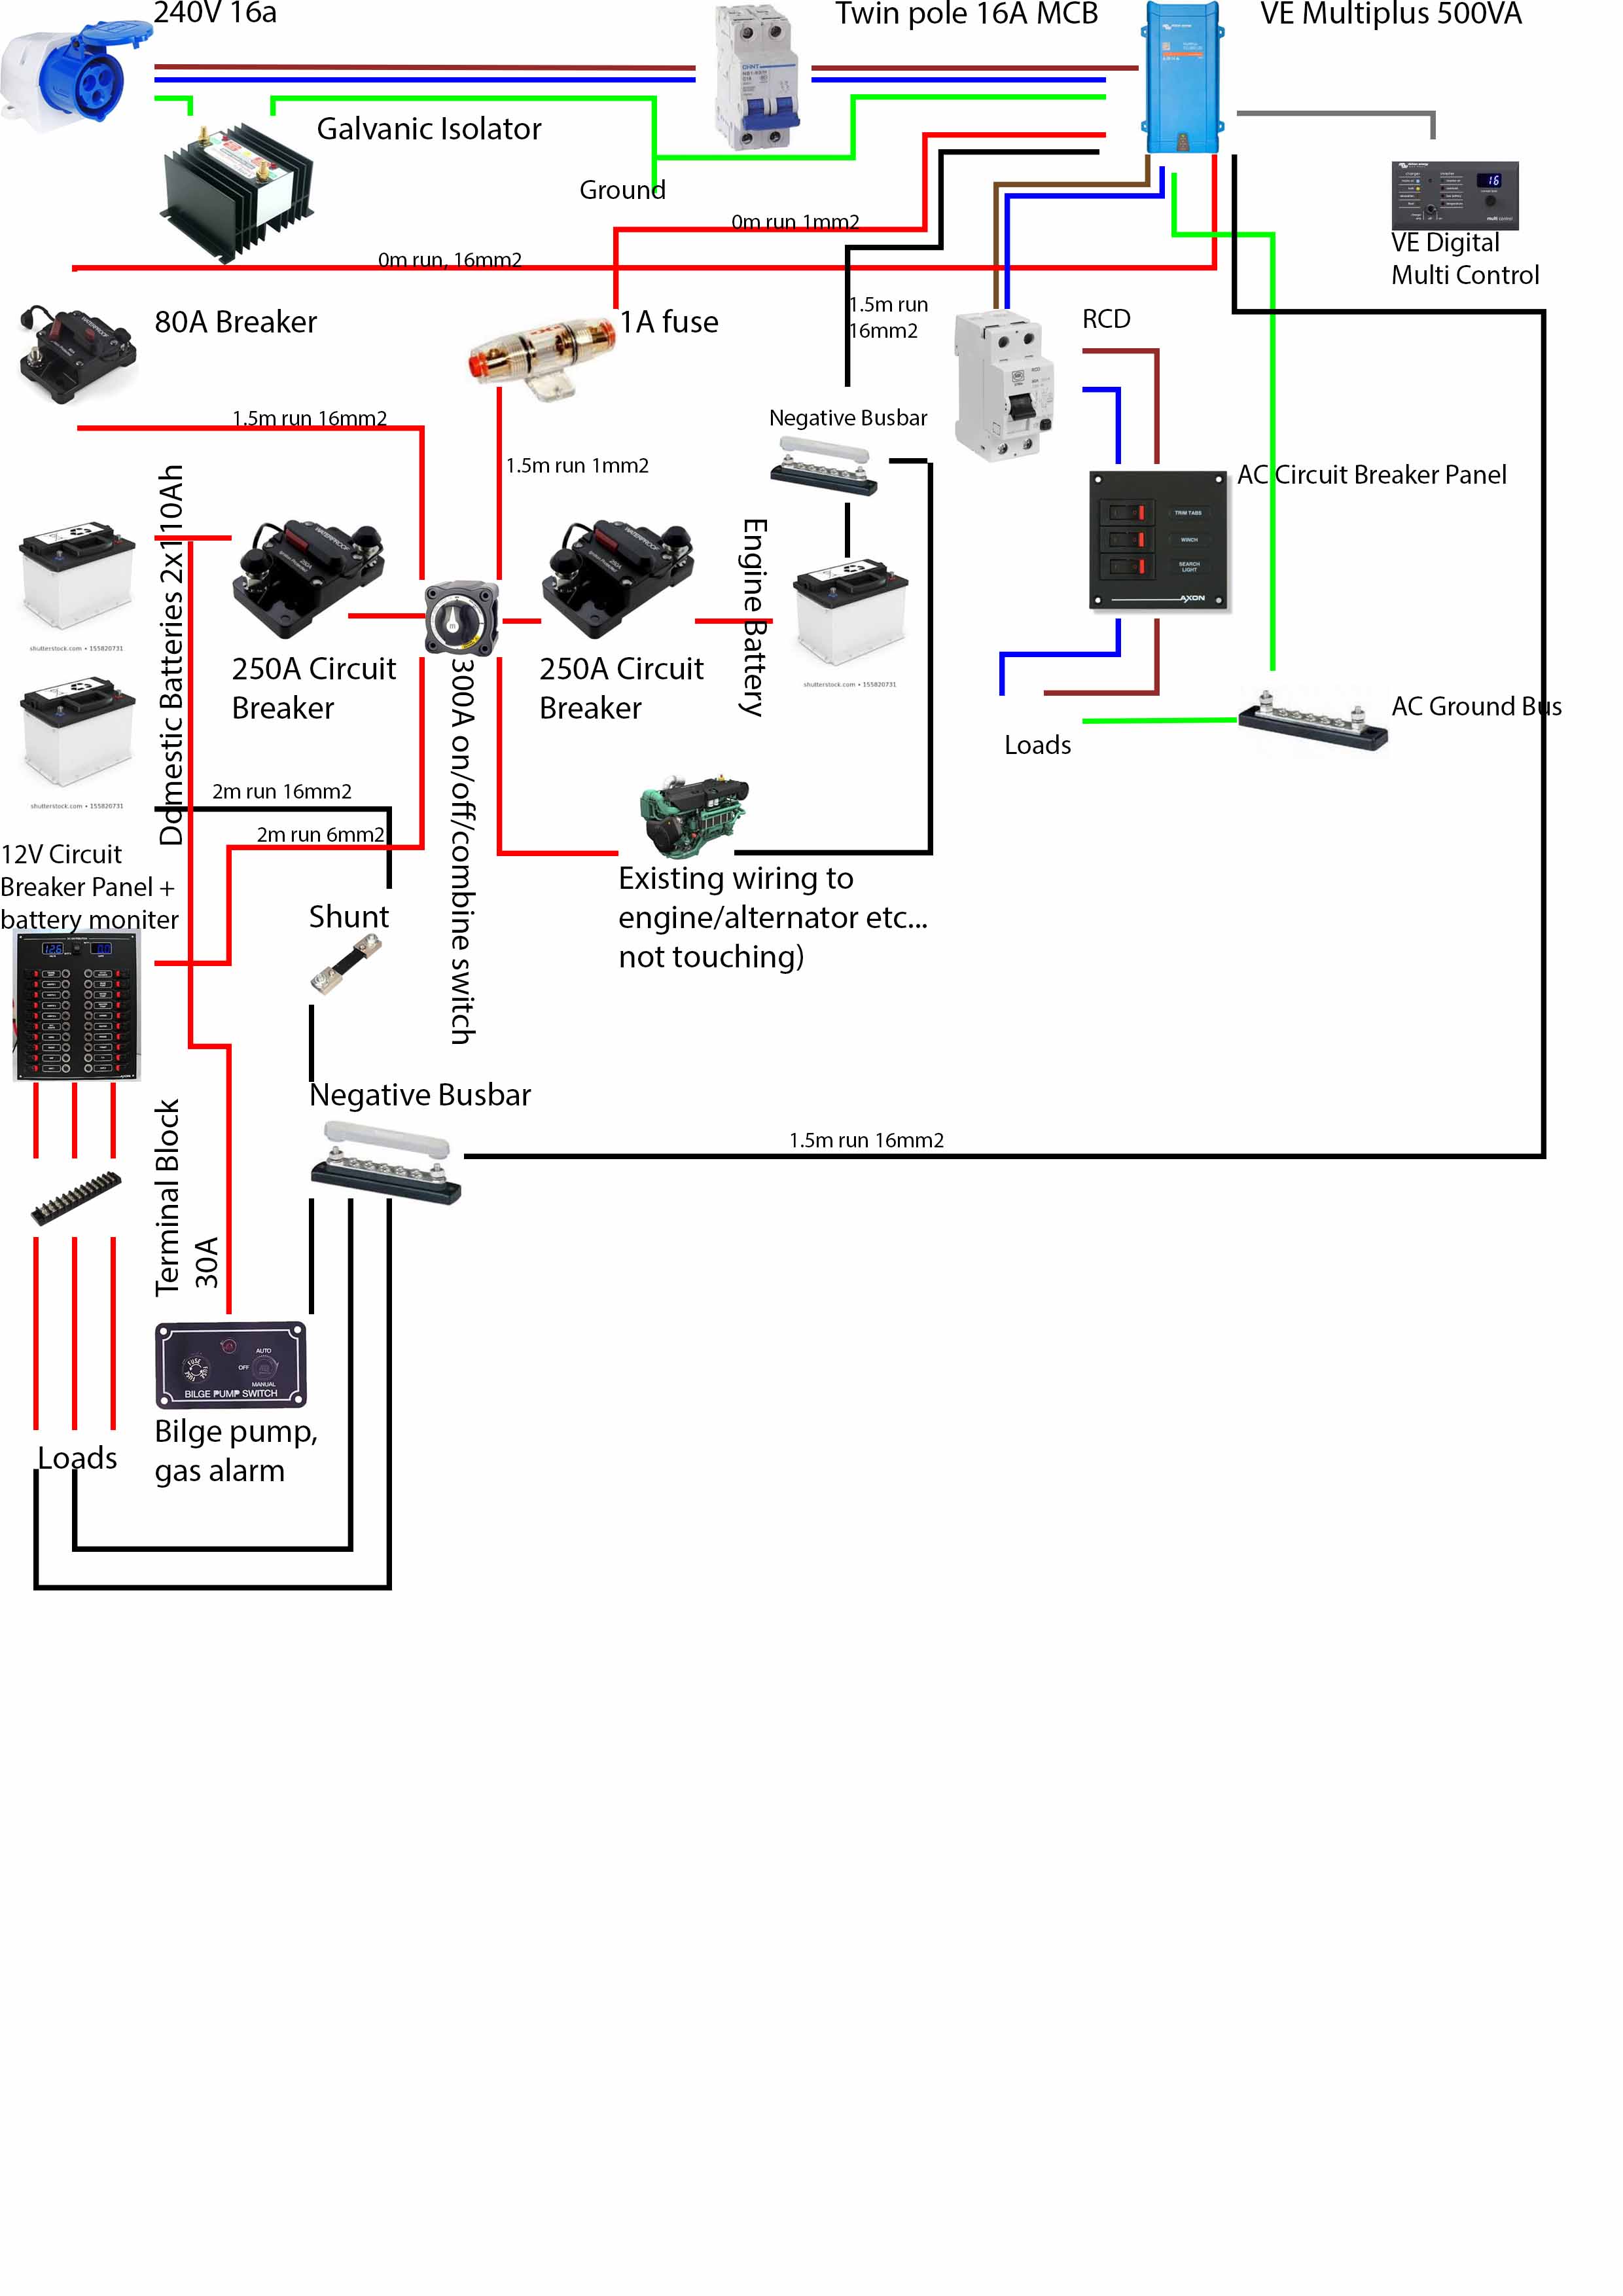 Any Pointers A Mock Up Wiring Diagram